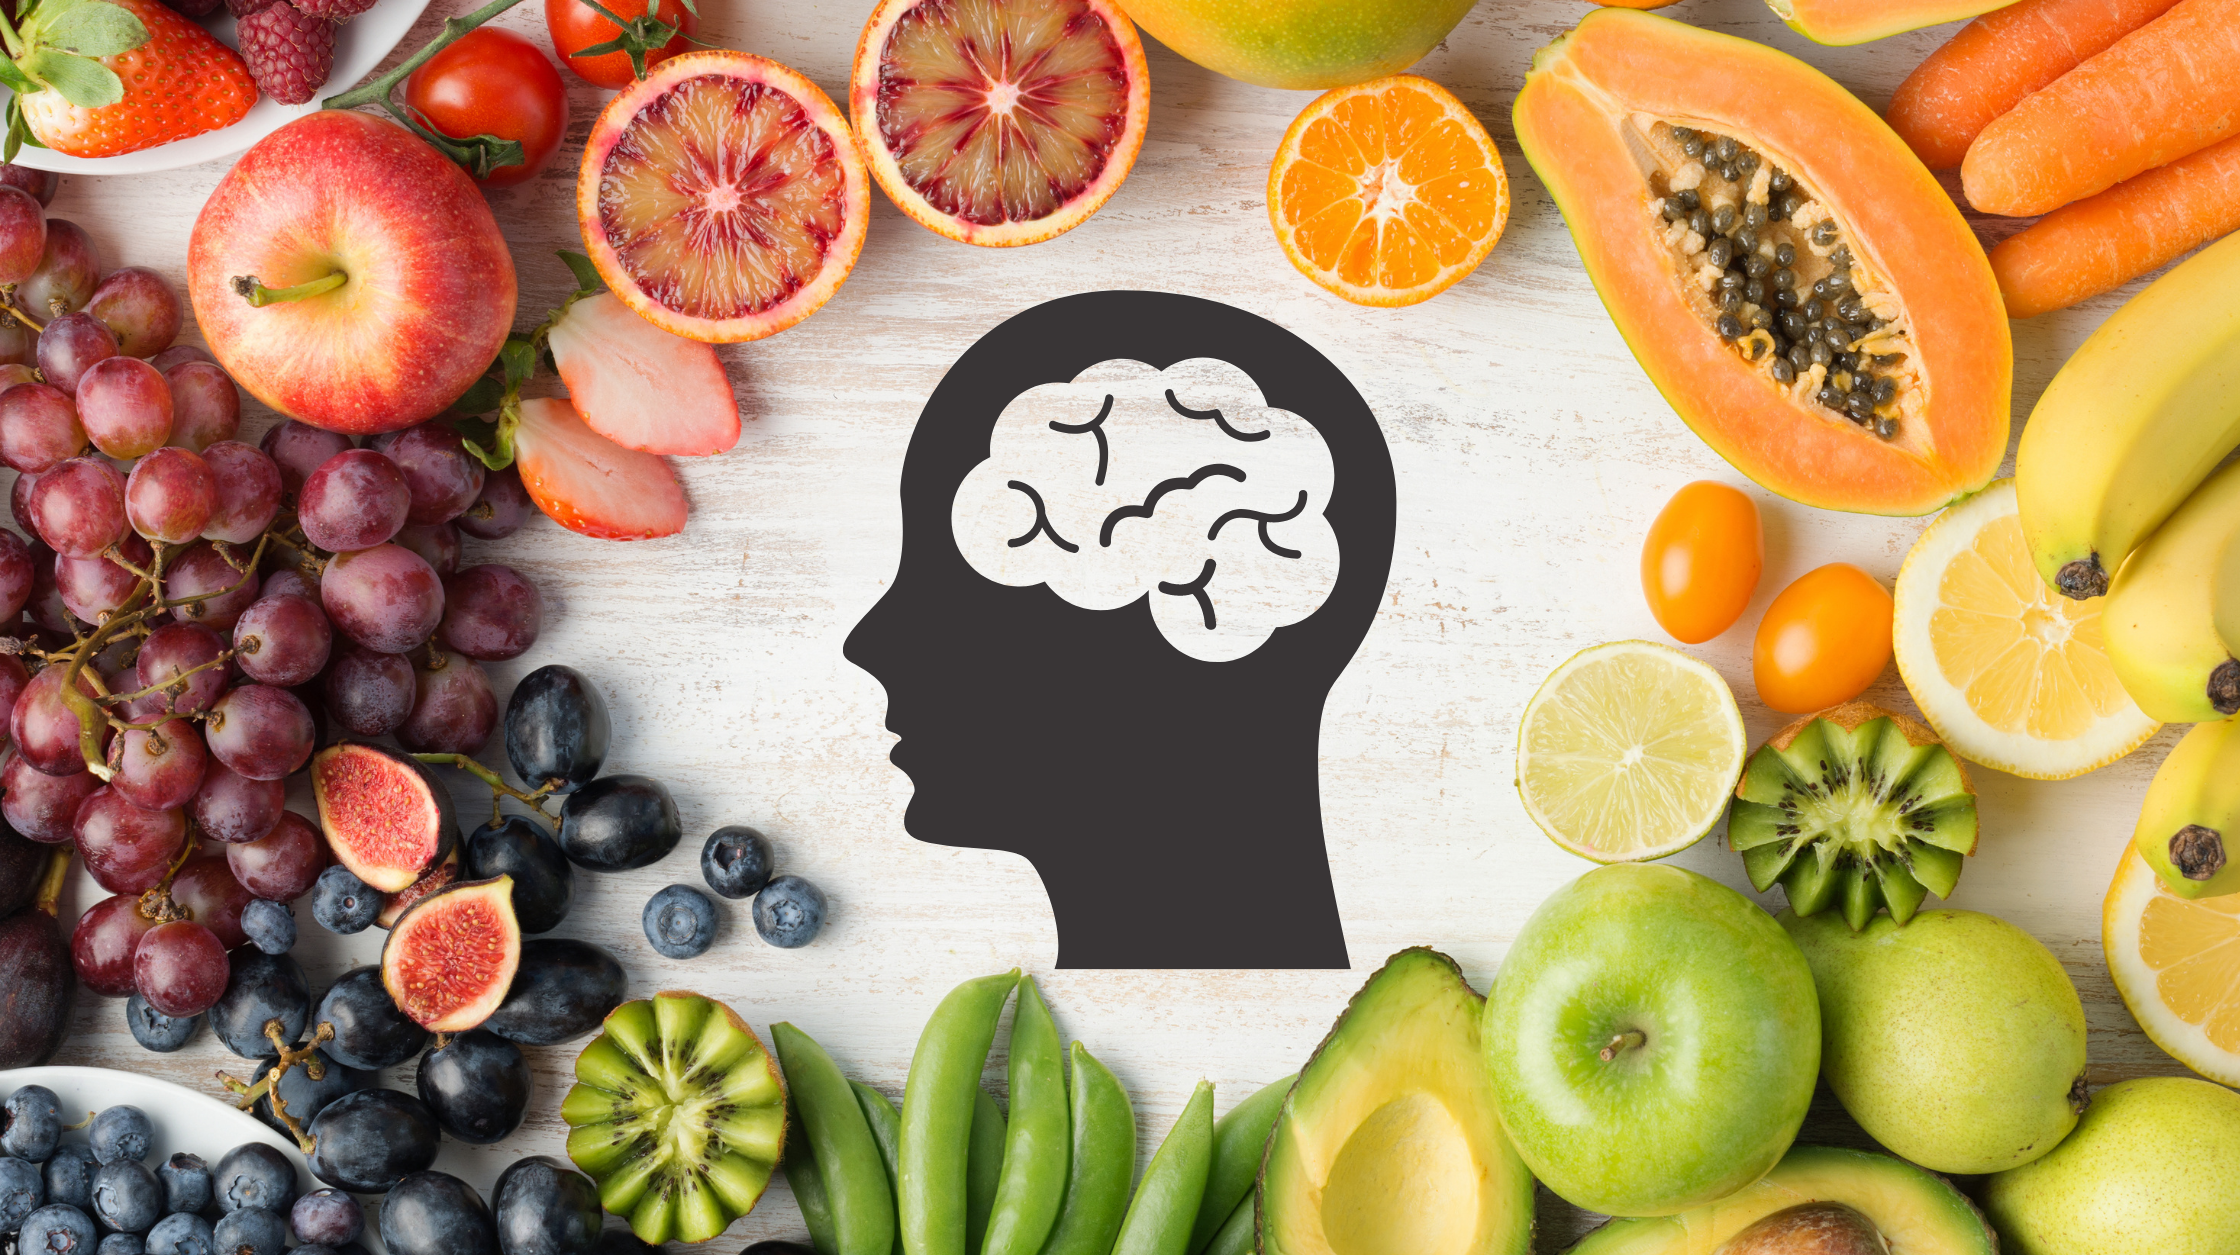 The Connection Between Nutrition and Mental Health: Food for Thought